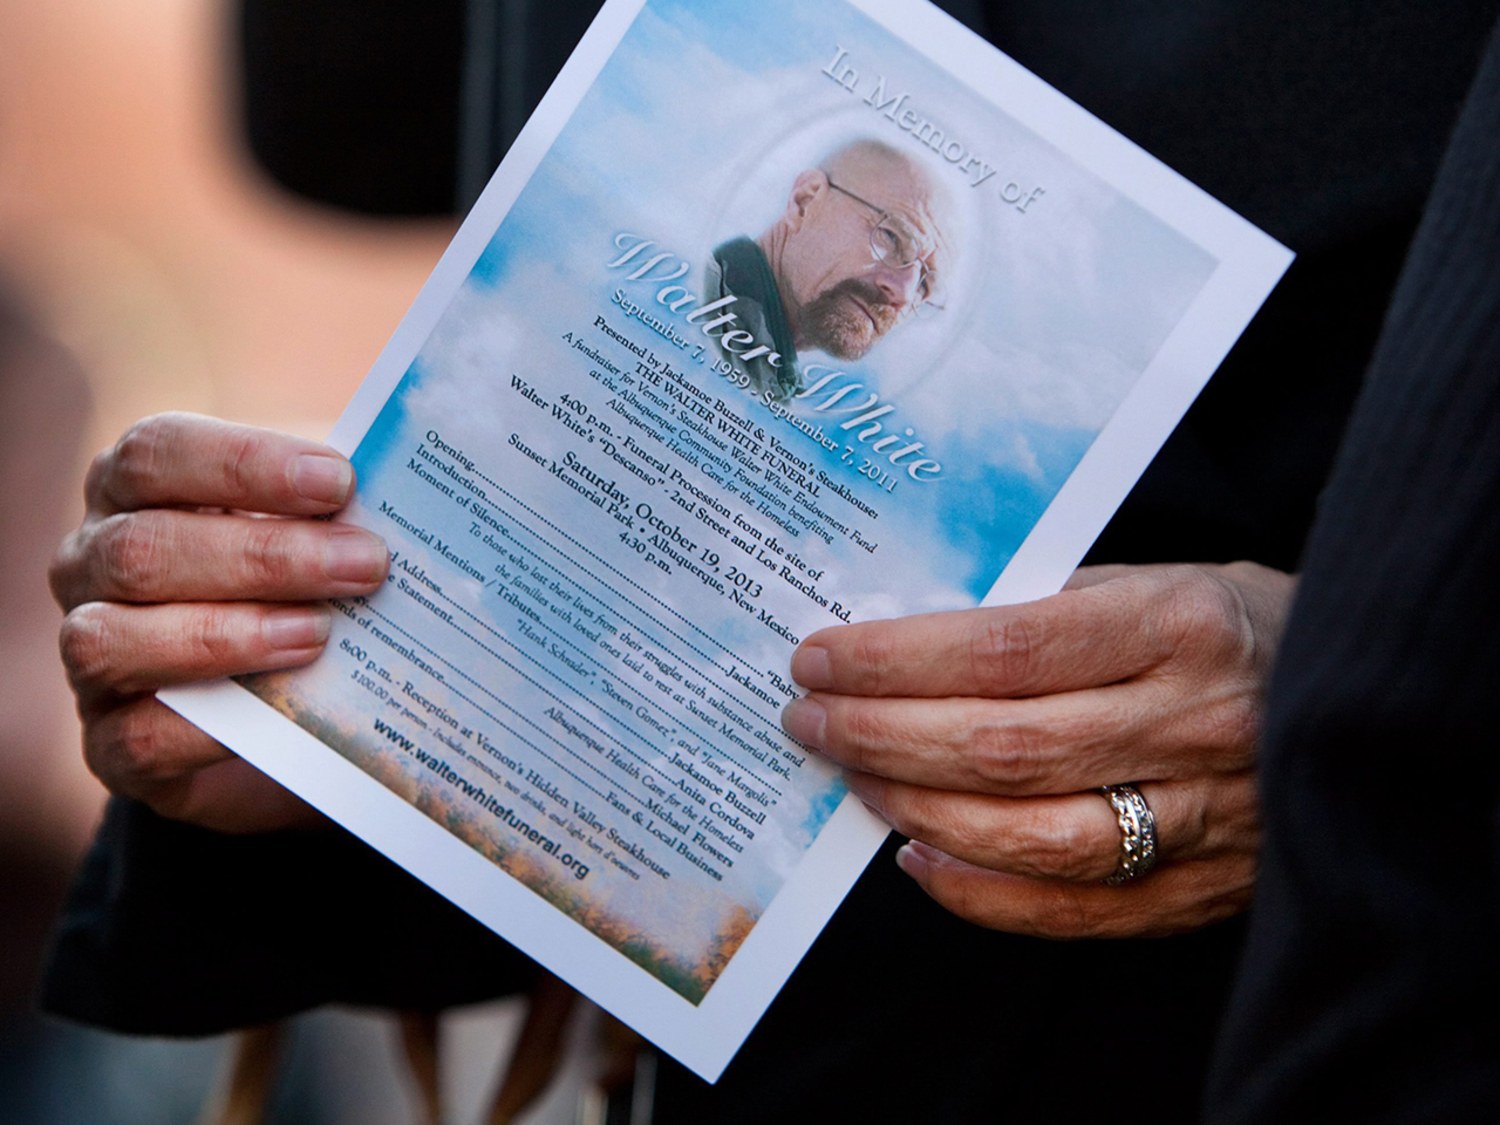 Breaking Bad' fans place Walter White obituary, TV